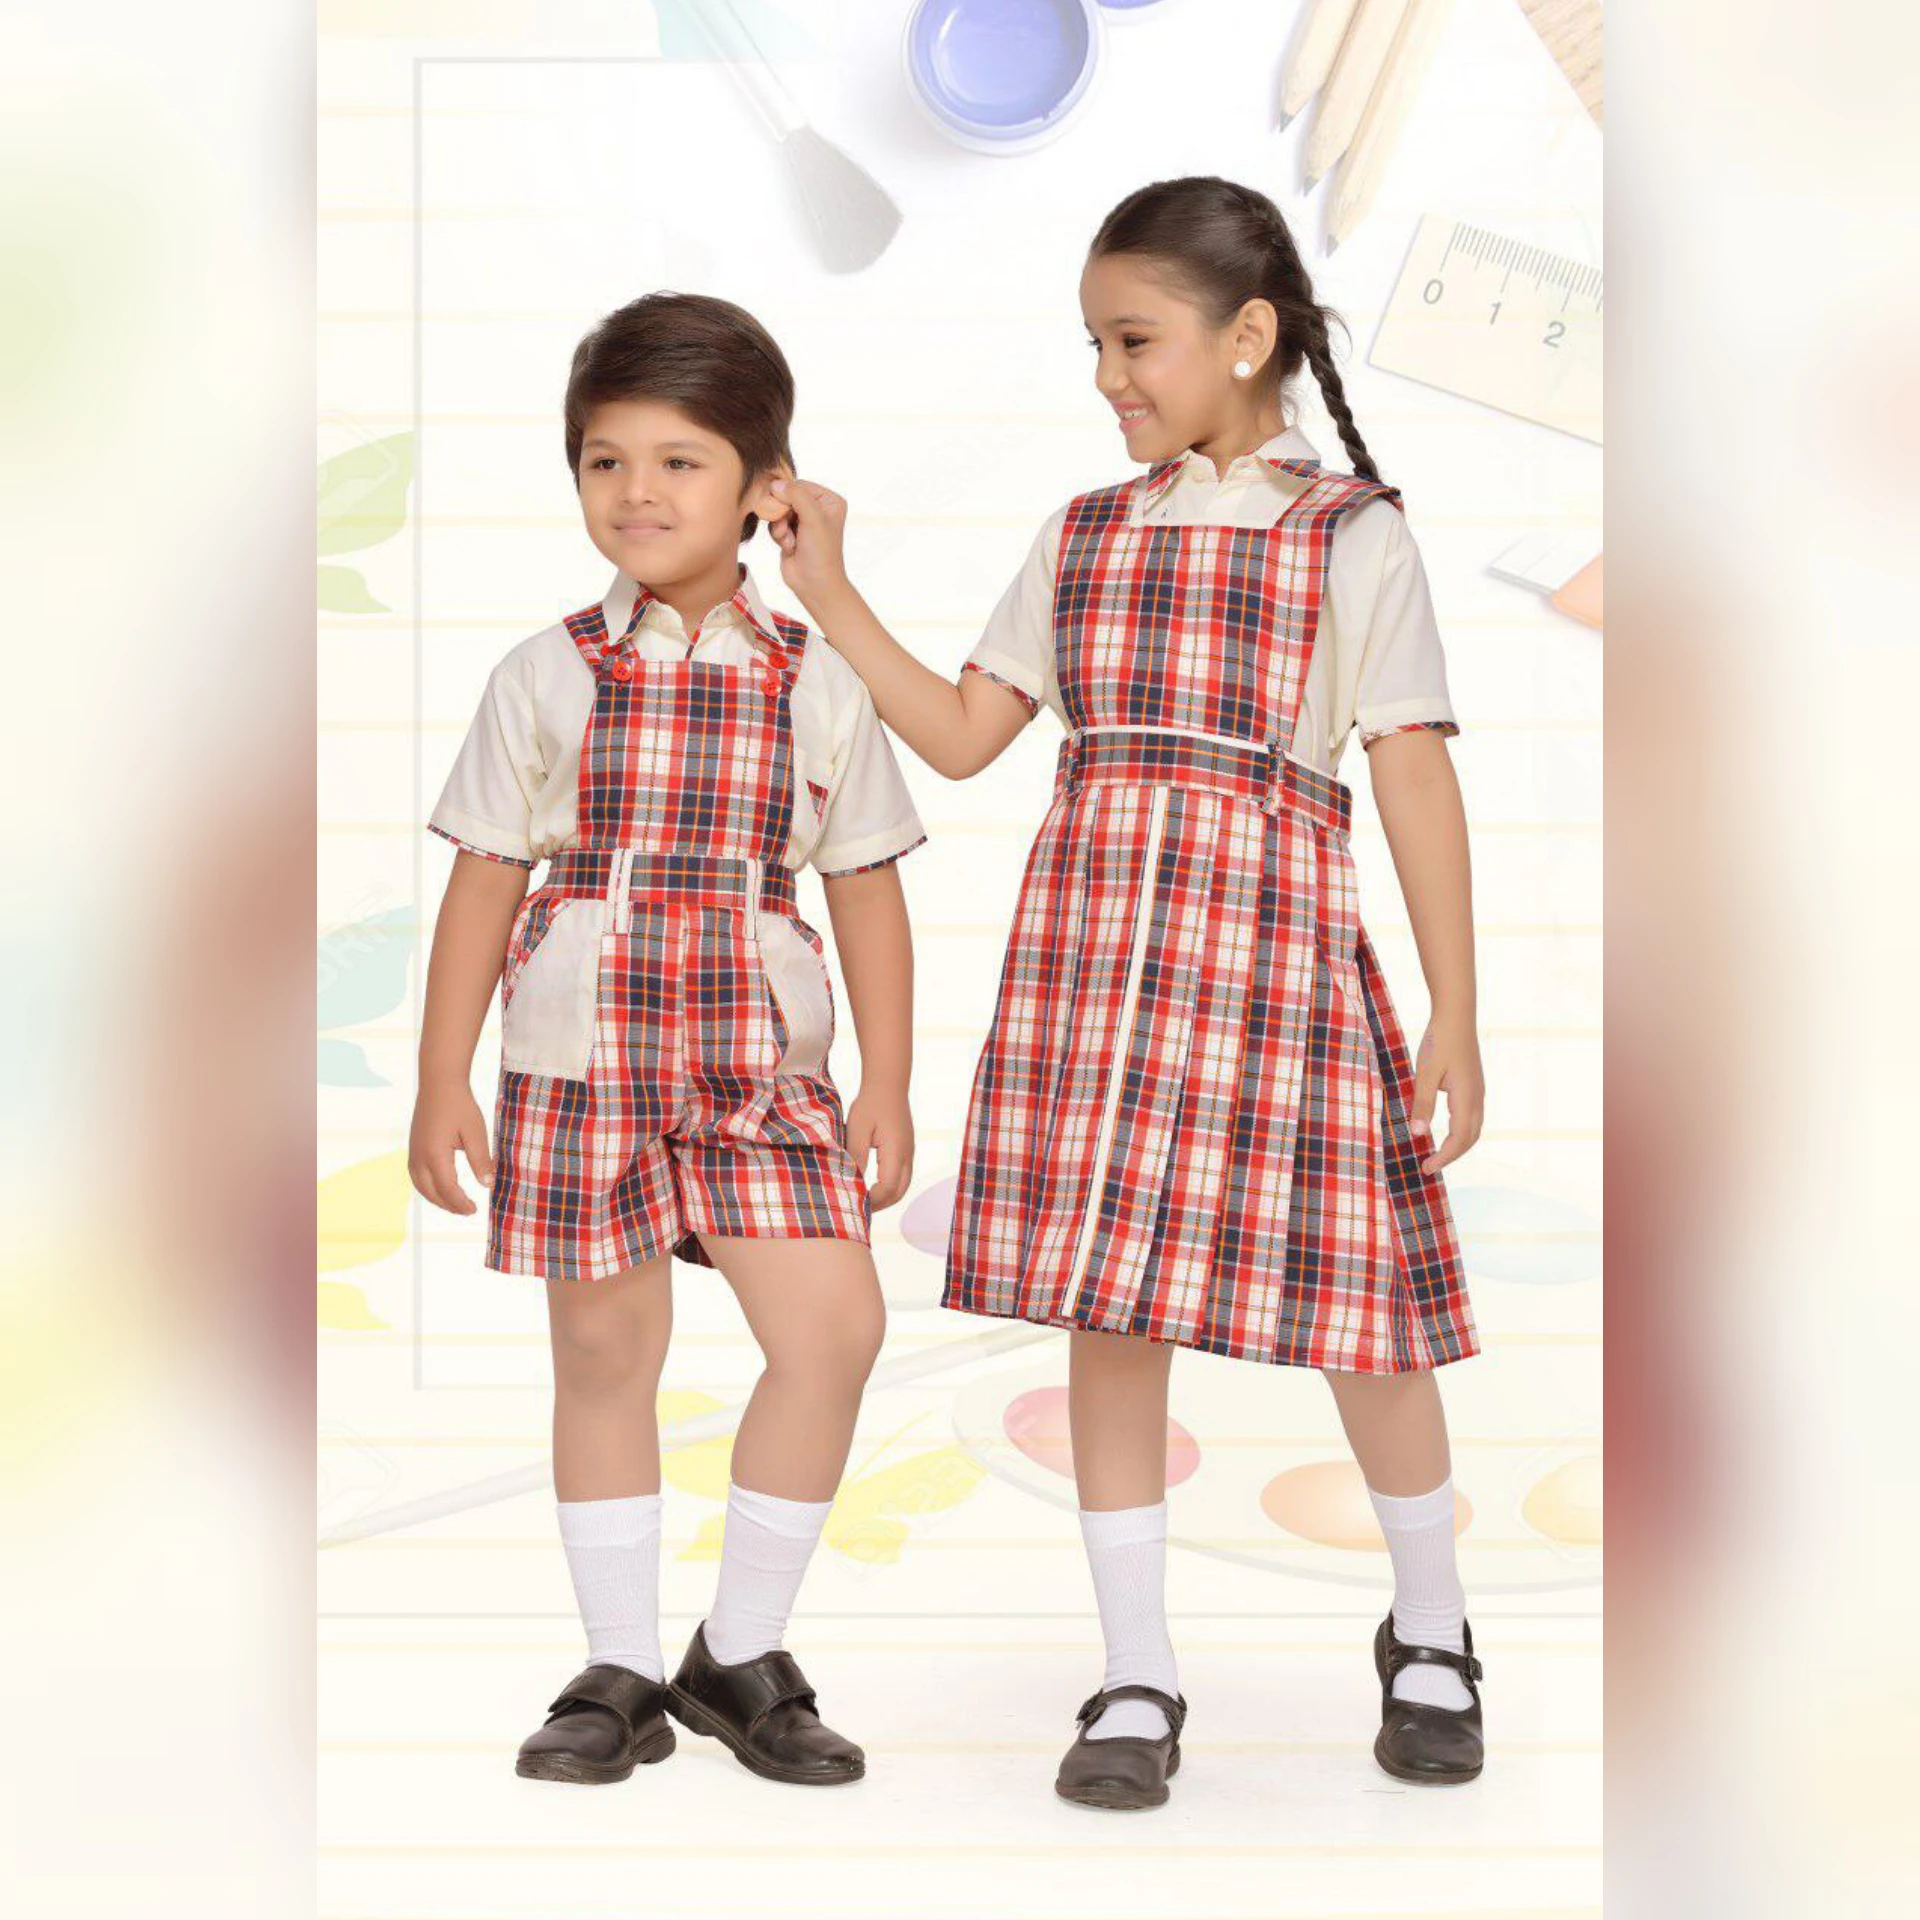 School uniform for all with various designs